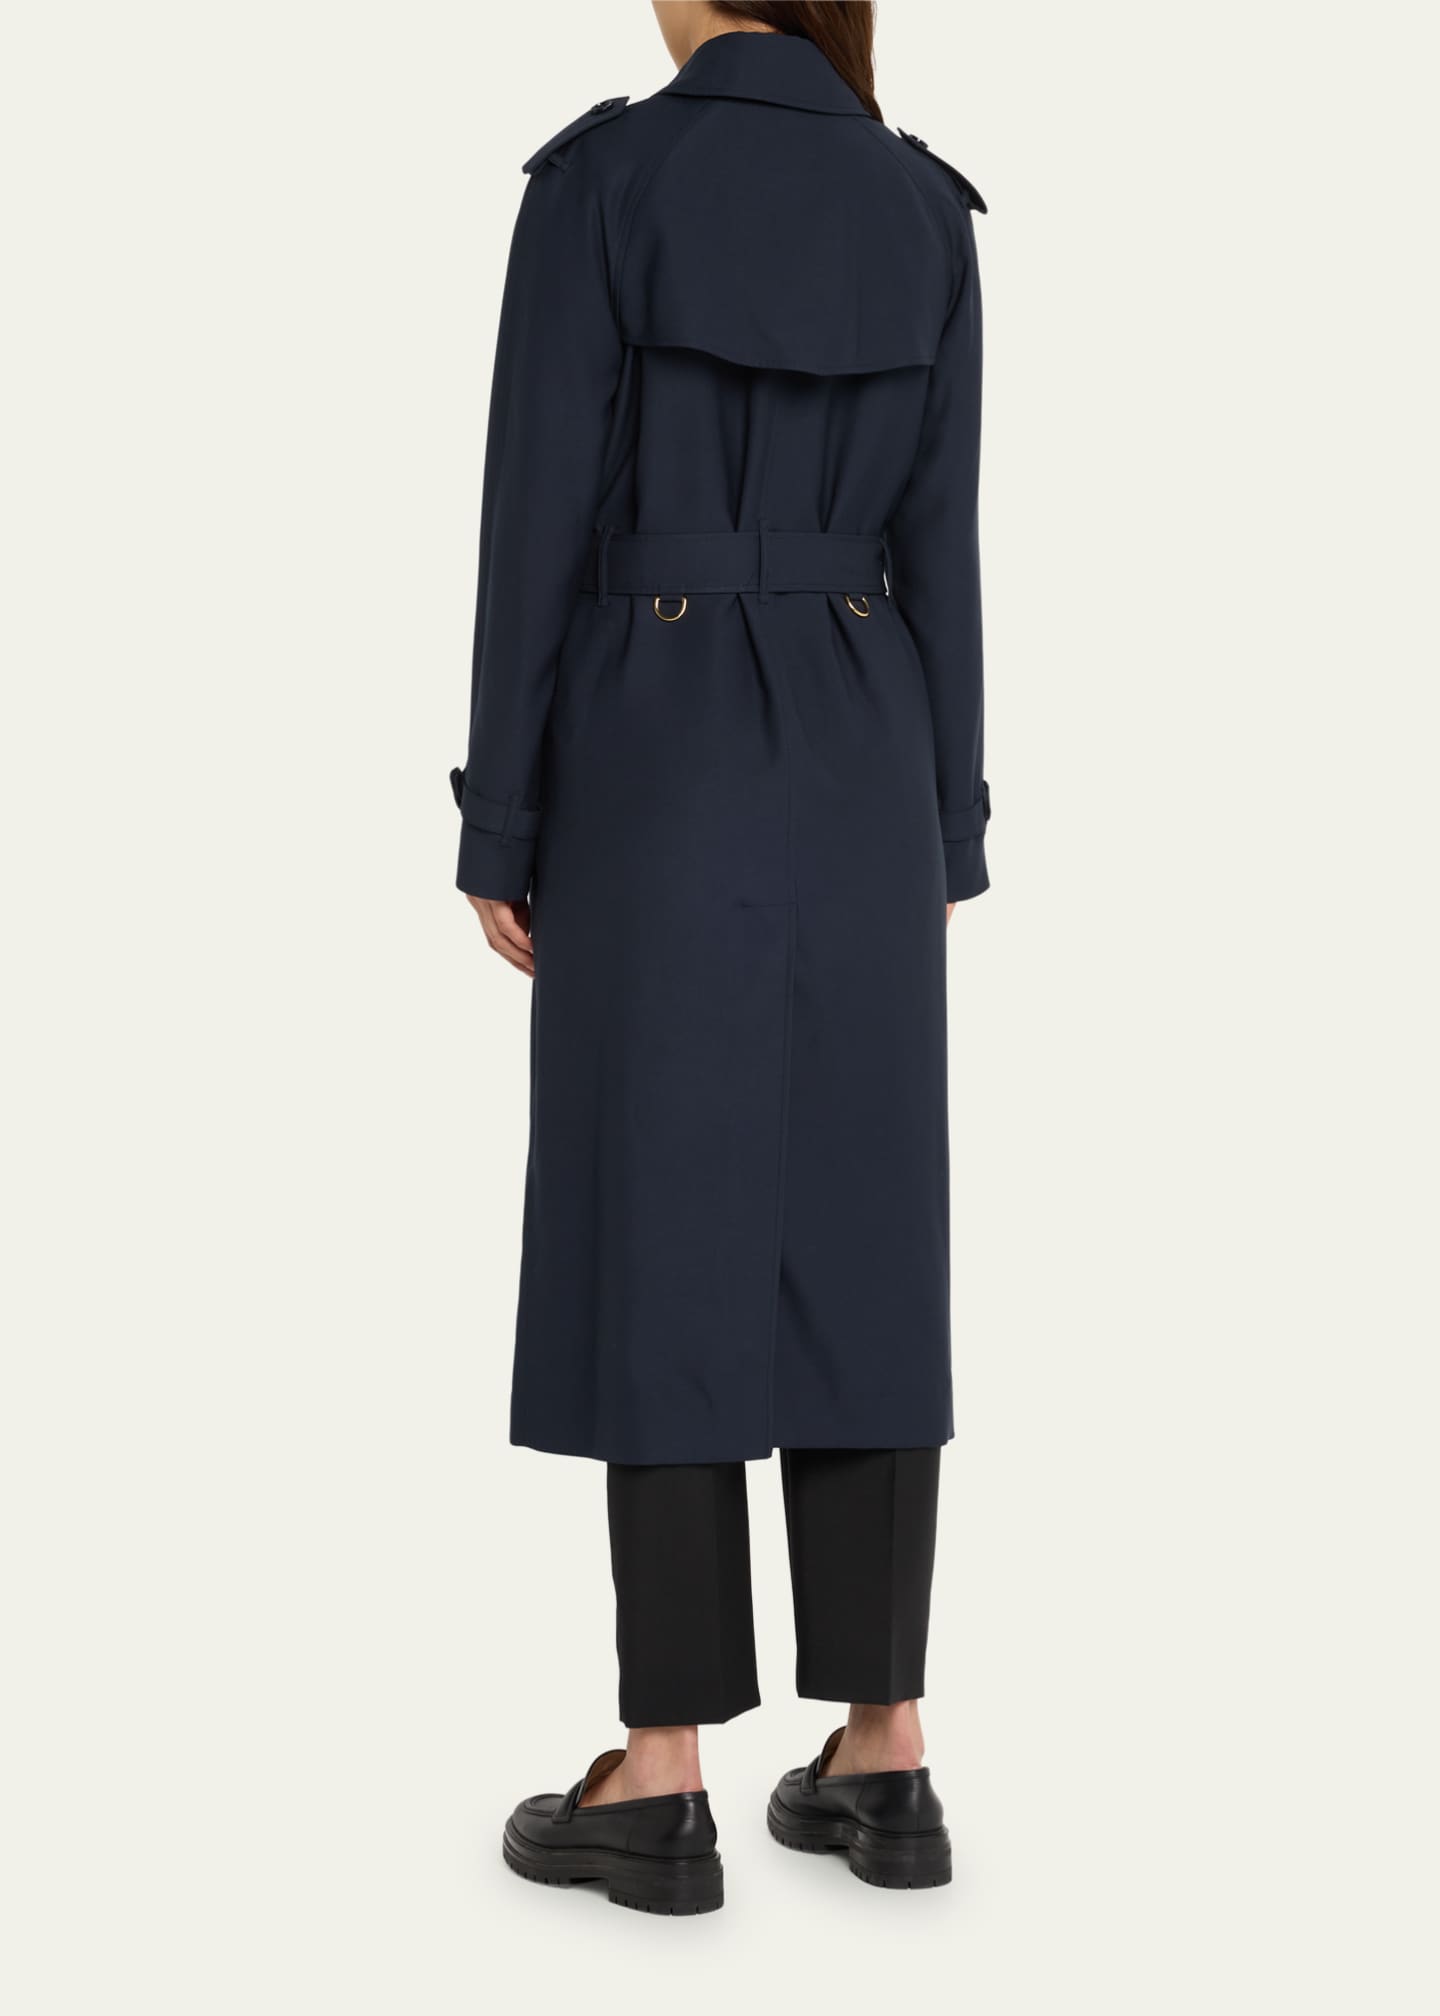 Woods oprejst Køb Burberry Belted Trench Coat with Chain Button Detail - Bergdorf Goodman